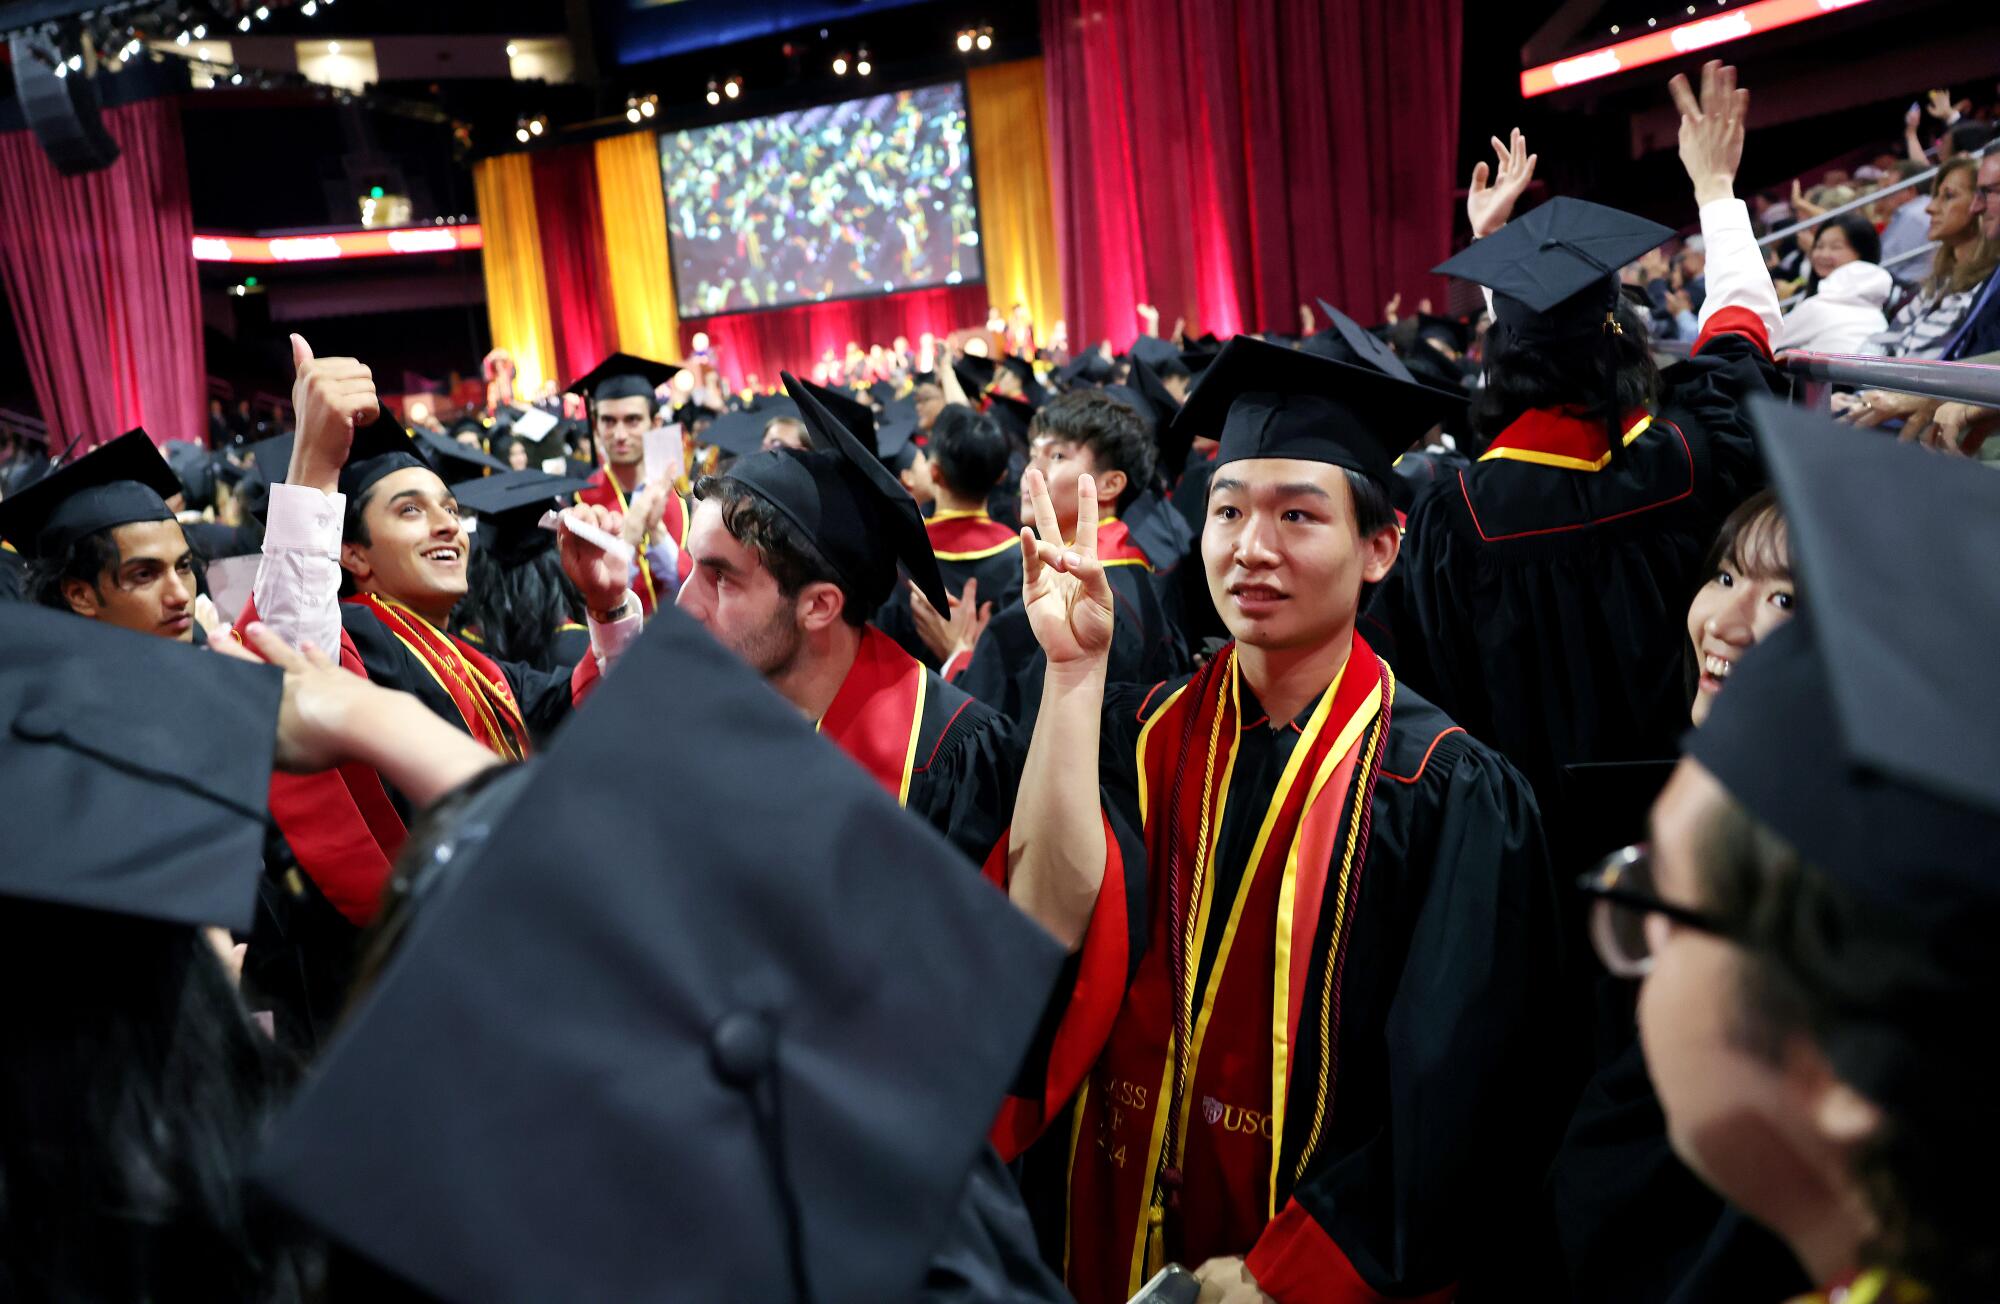 A crowd of USC graduates, one giving the "Fight On" hand gesture, in black gowns and mortarboard hats